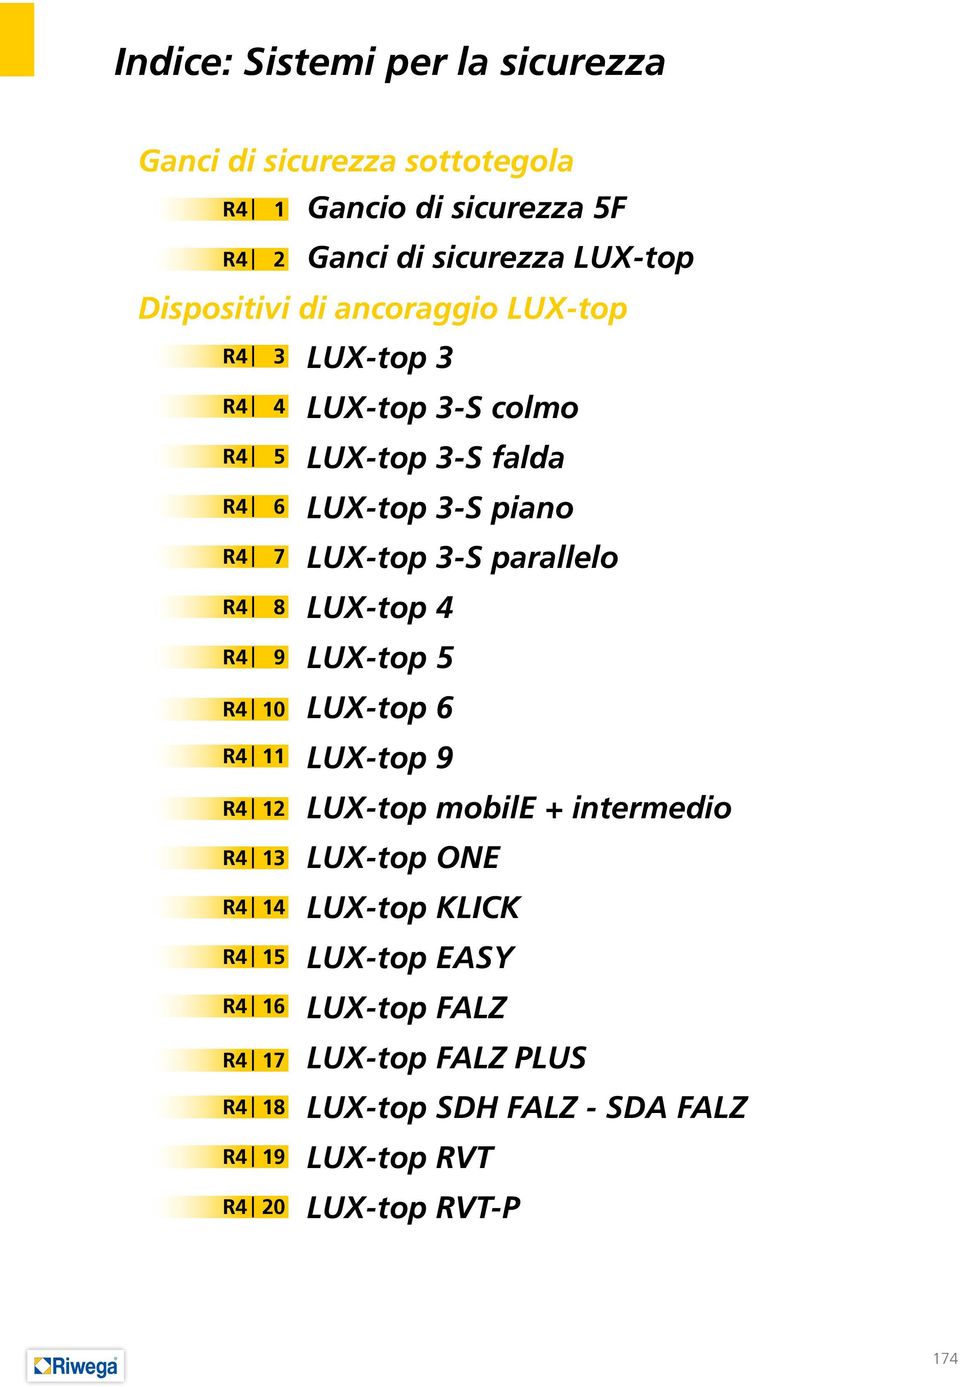 LUX-top 3-S colmo LUX-top 3-S falda LUX-top 3-S piano LUX-top 3-S parallelo LUX-top LUX-top 5 LUX-top 6 LUX-top 9 LUX-top mobile